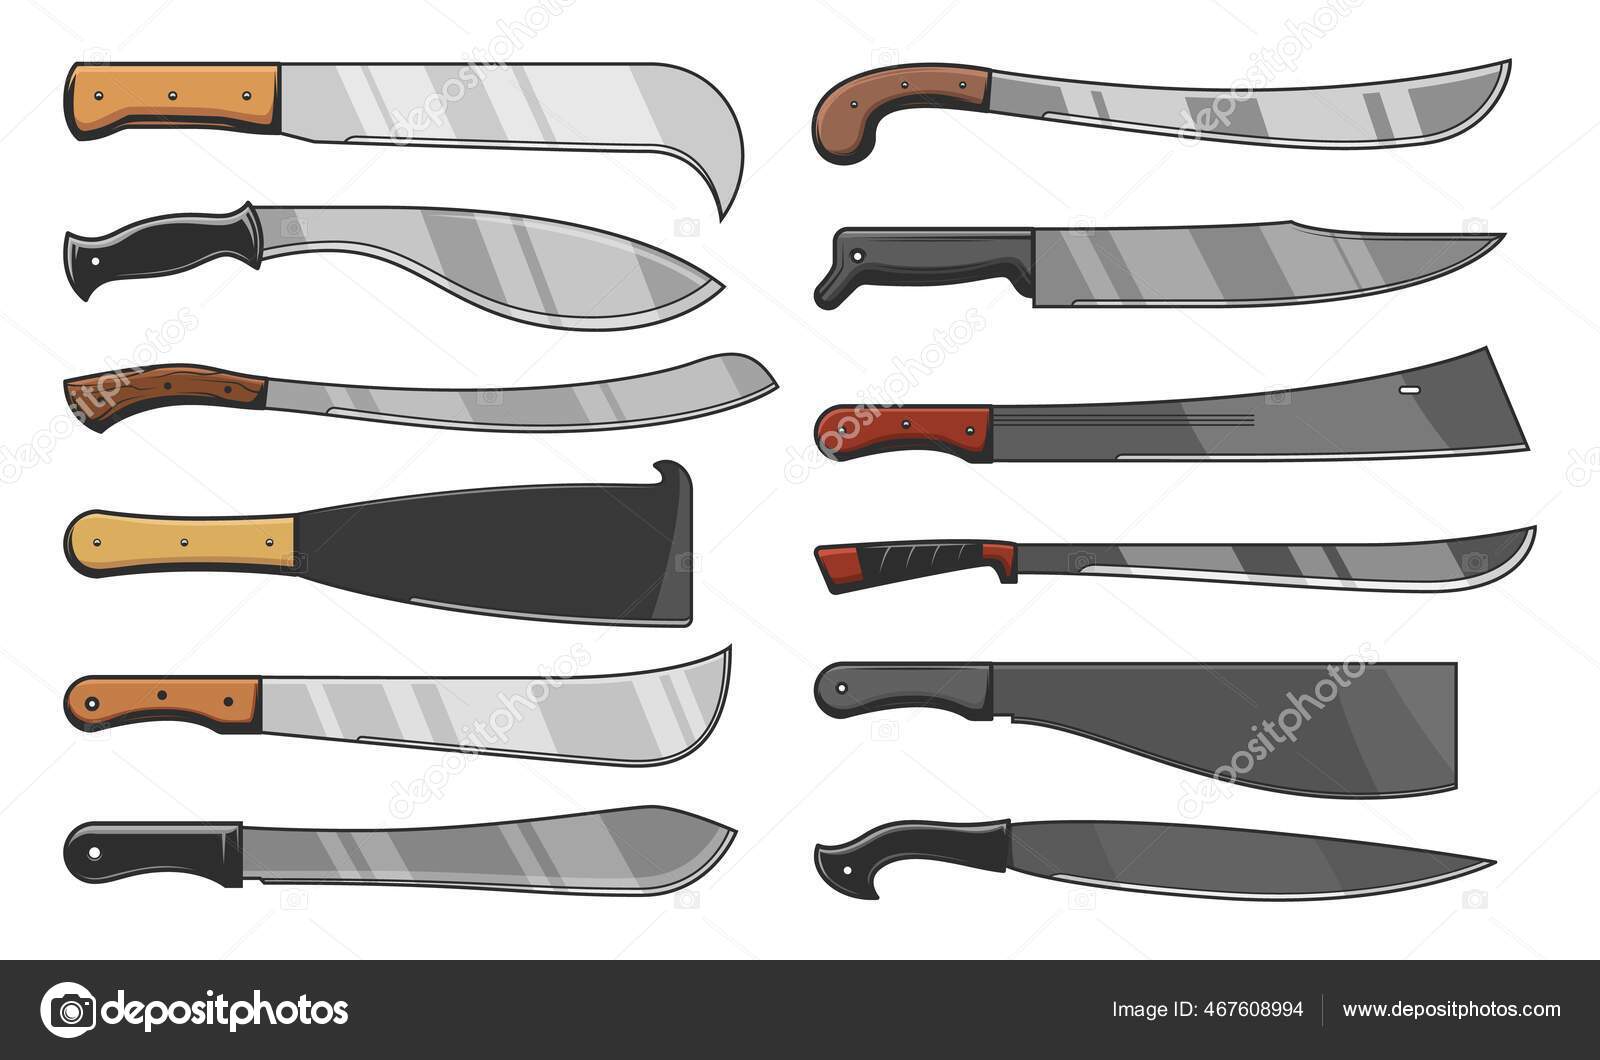 Knife Blades Cleavers Combat Agriculture Cutters Vector Icons Blade ...